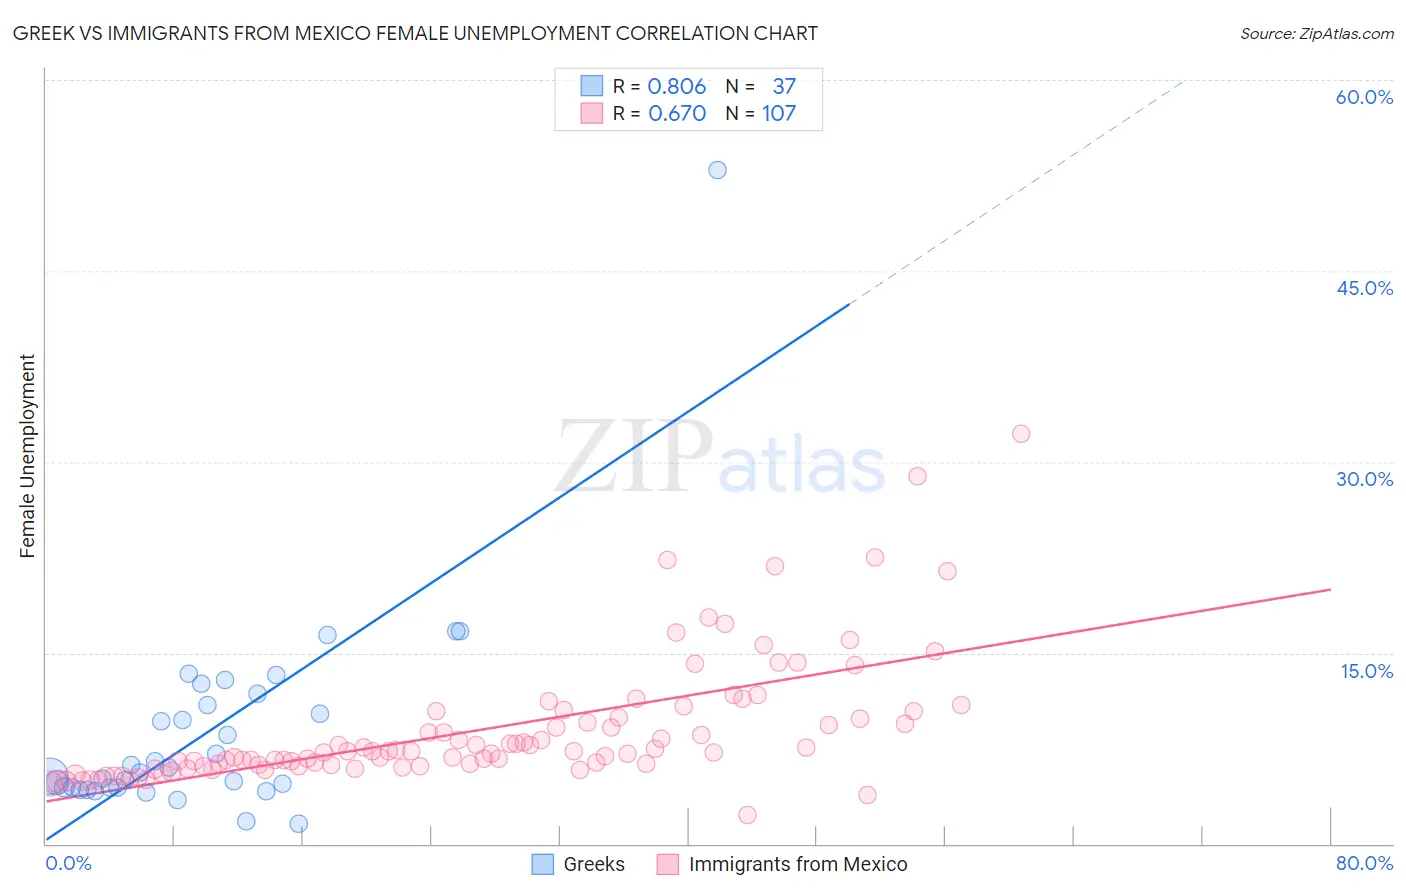 Greek vs Immigrants from Mexico Female Unemployment